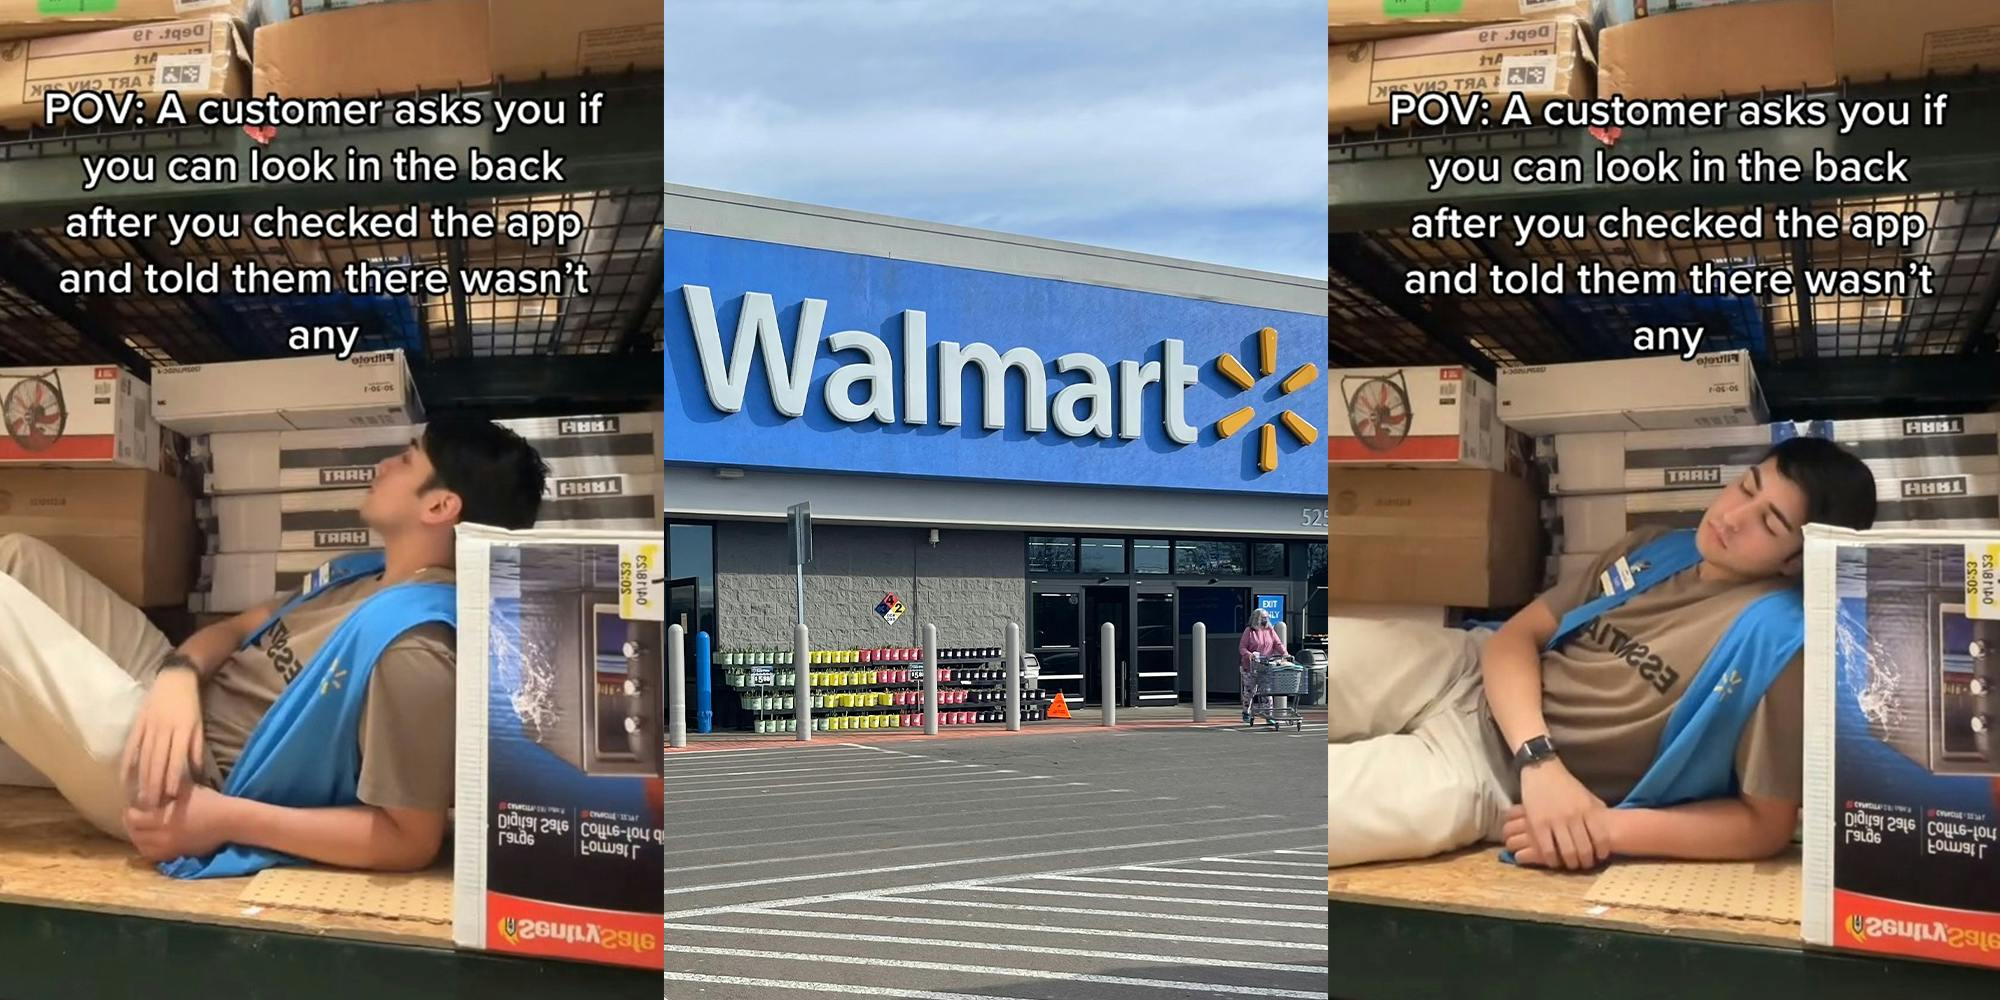 Walmart worker shares what he does when customer asks him to check in back for item